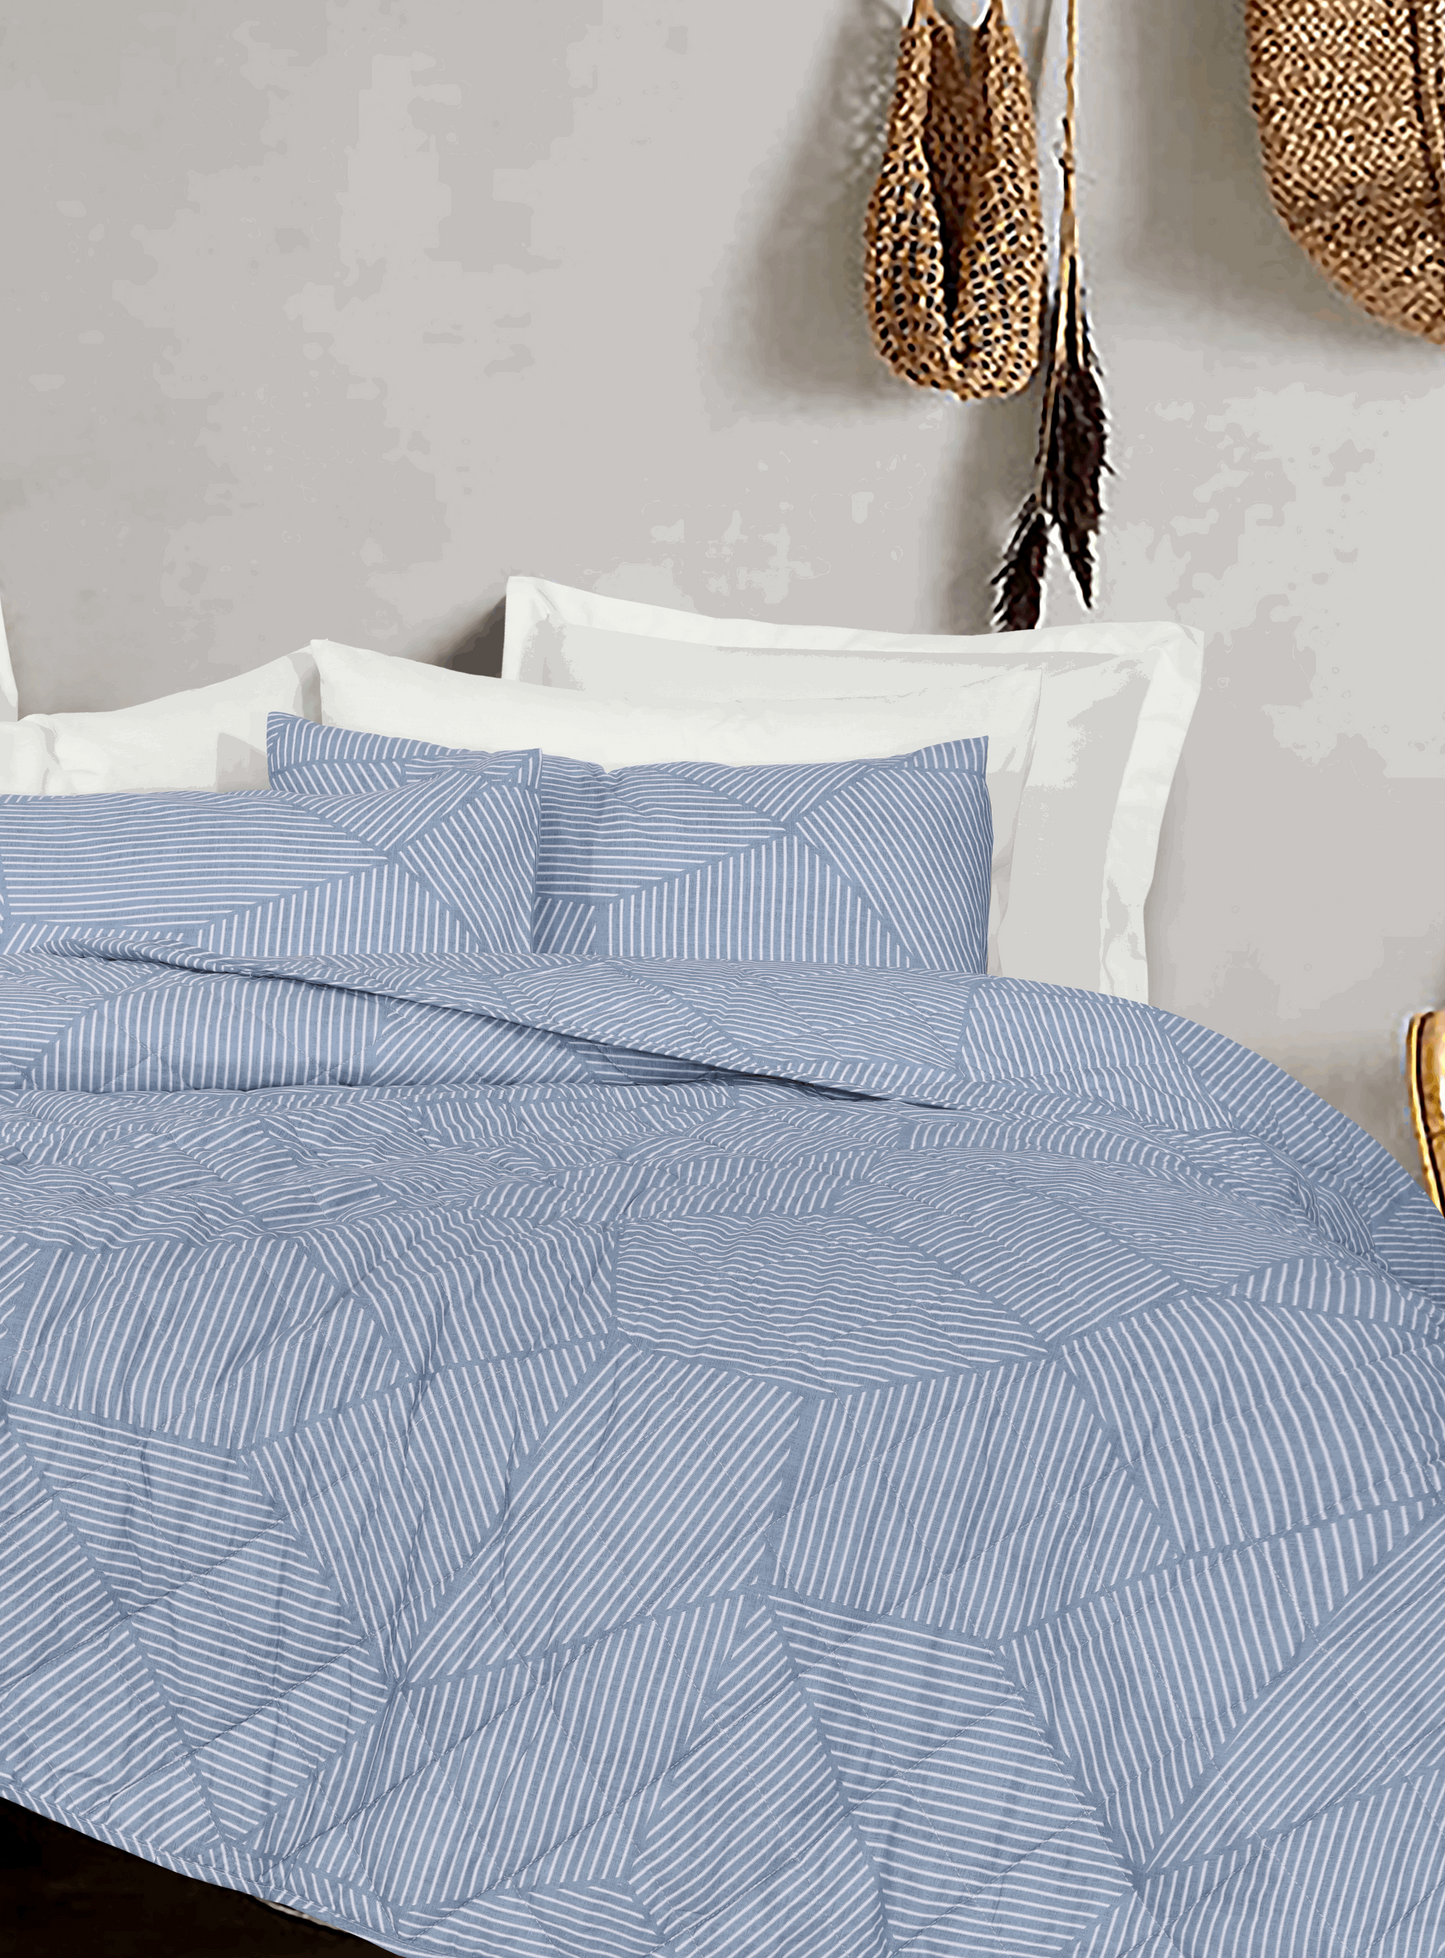 100 % Cotton Bedspread with Extra Standard Pillow Covers | Ariana Demin Quilt